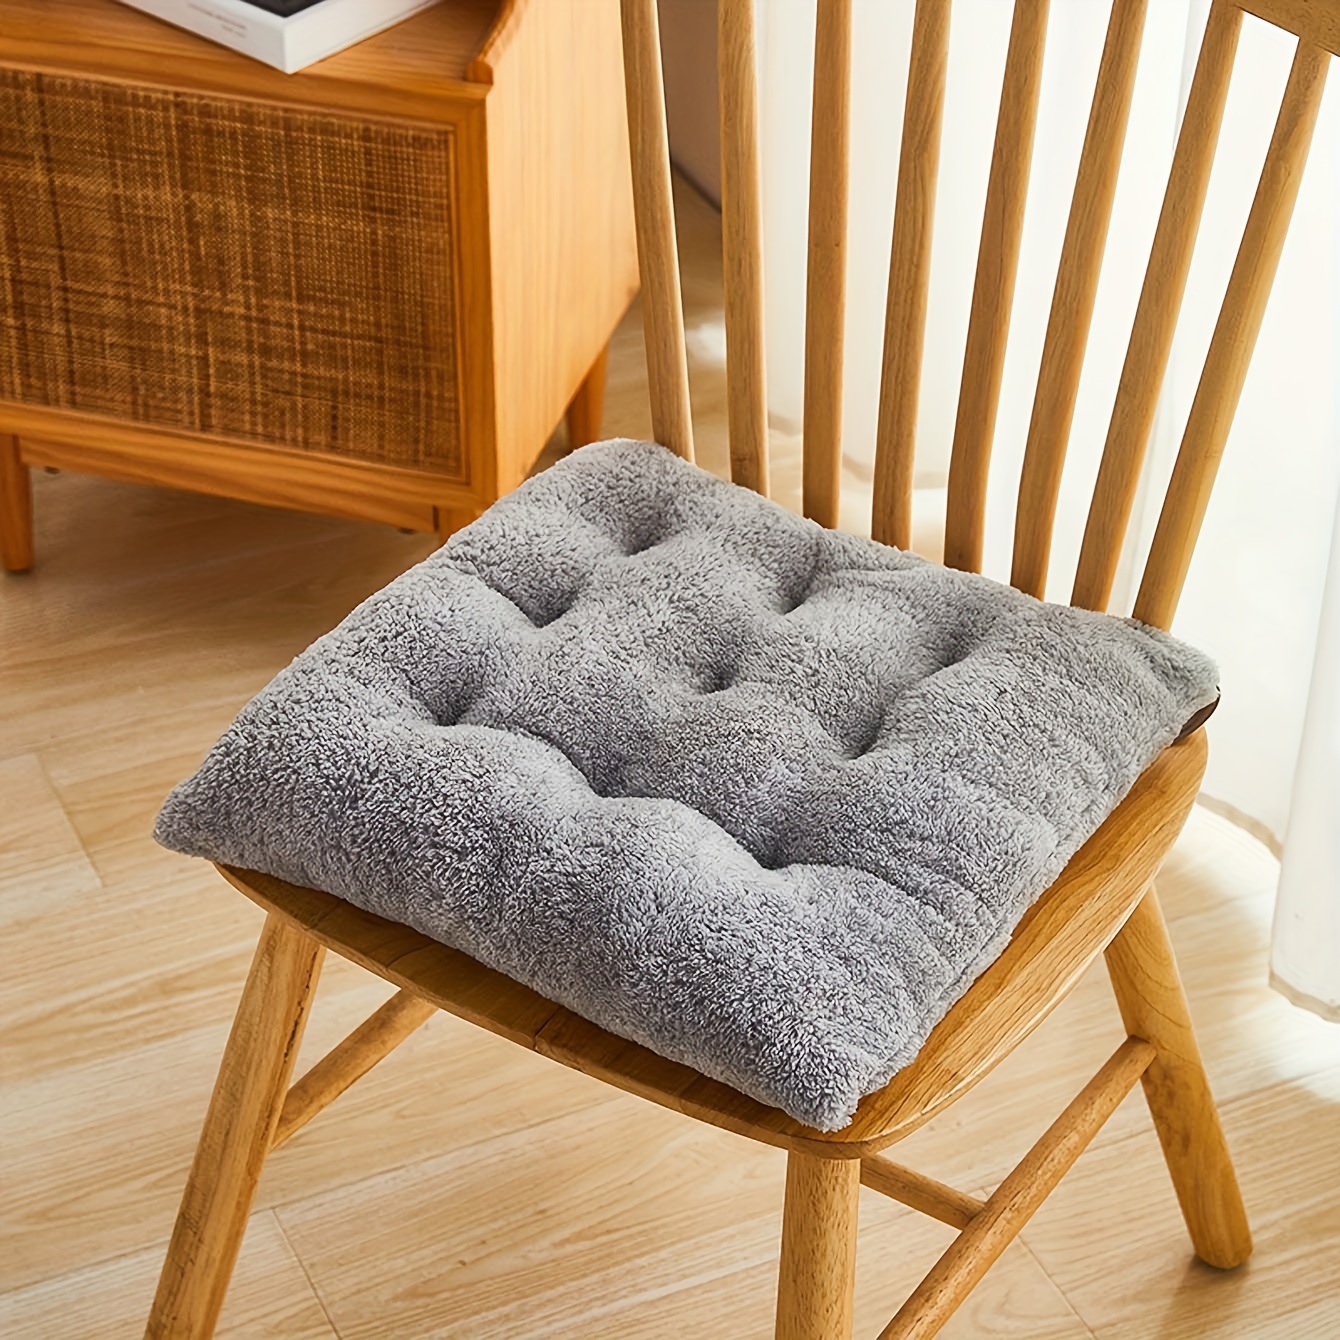 Office Chair Cushion for Desk Chair,Seat Cushion for Desk Chair Cushions  for Dorm Desk Chair with Back